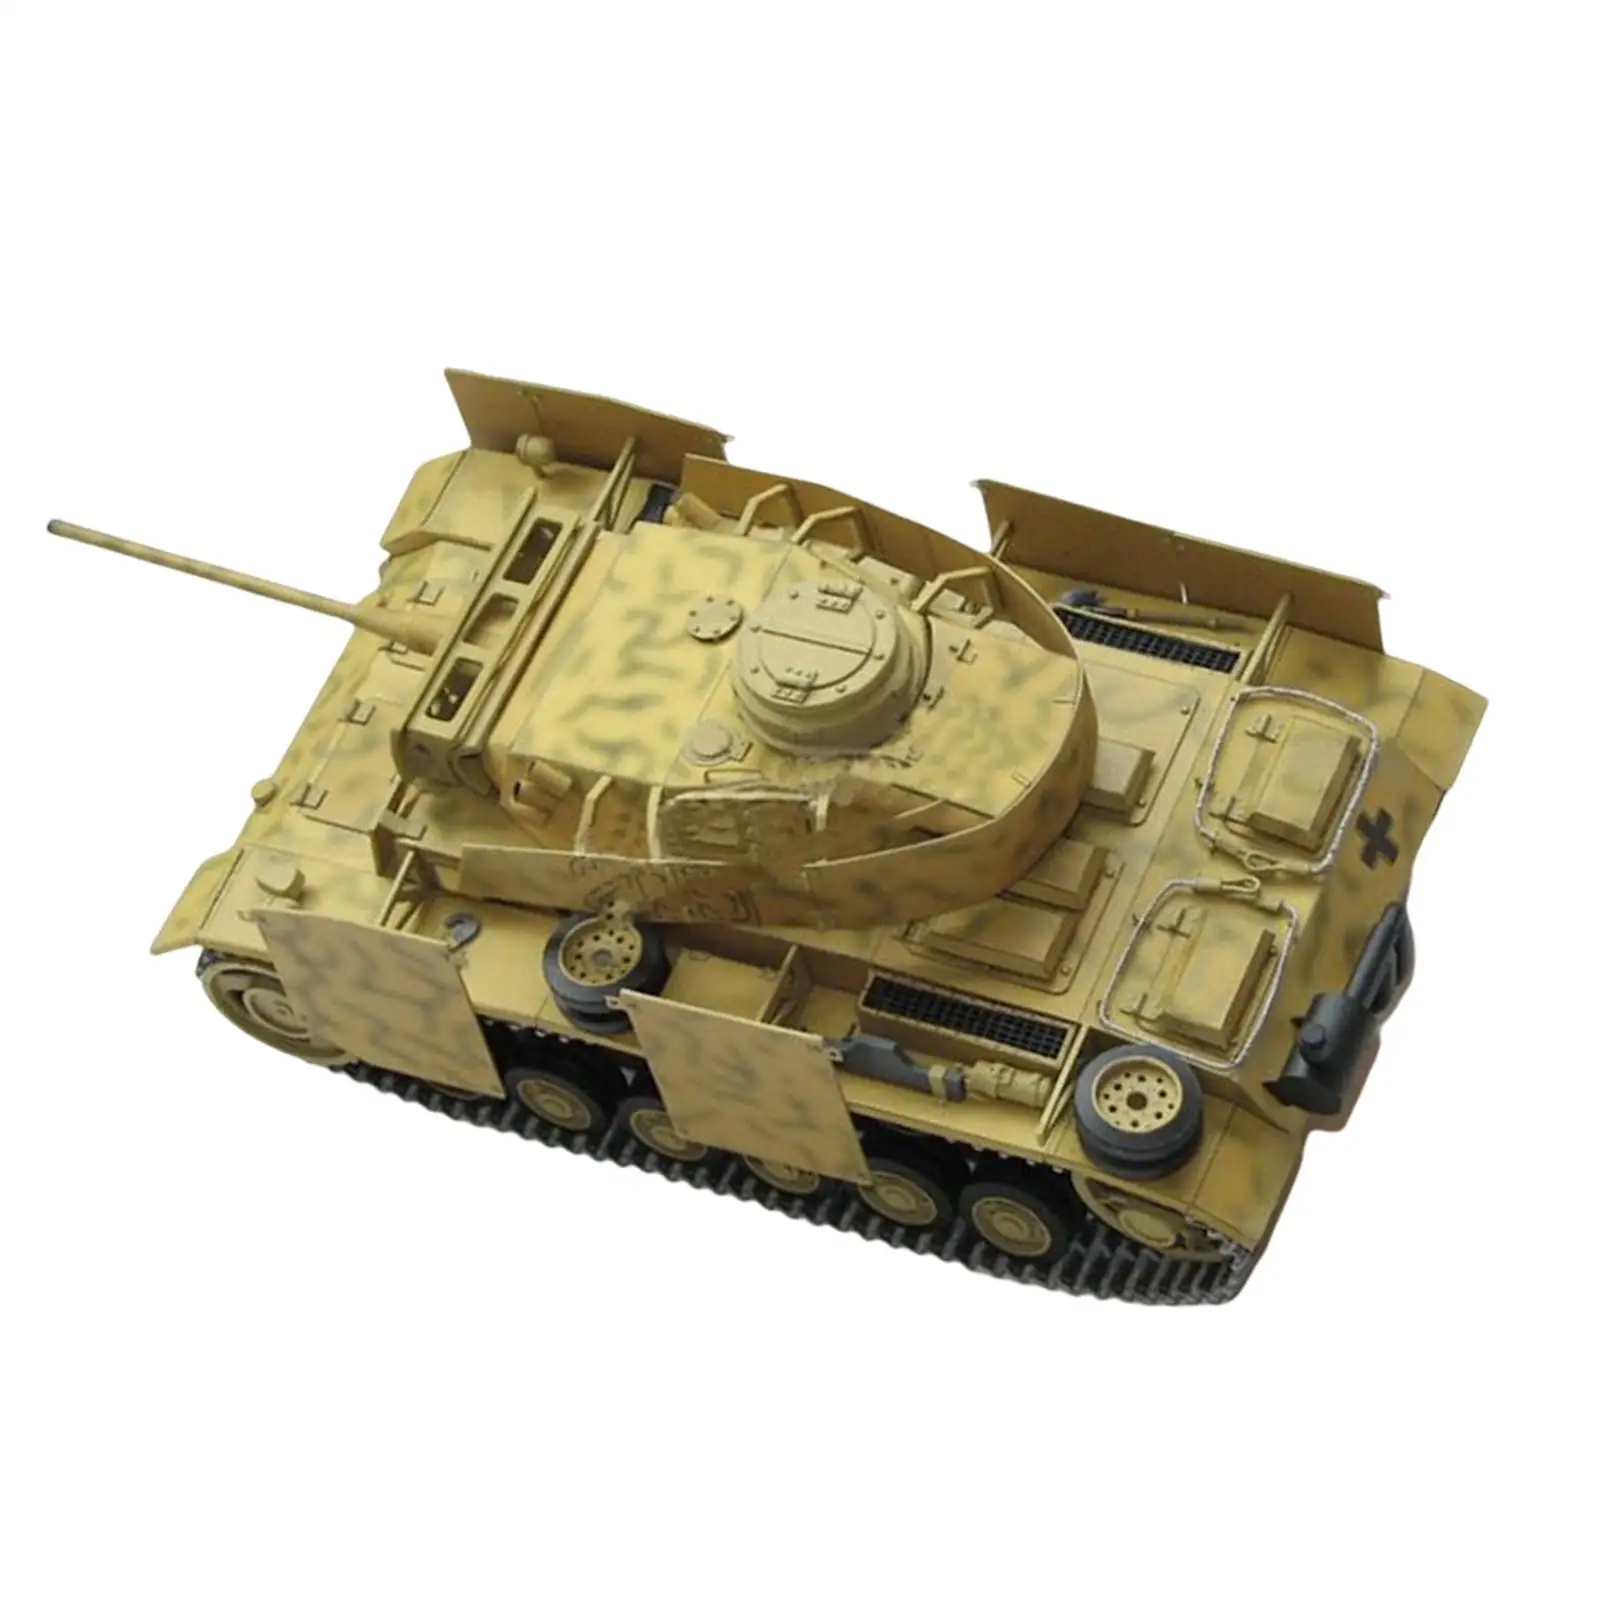 1:25 Static Tanks Building Kits Ornaments Paper Craft DIY Assemble Collectibles Party Favors Toy Durable 3D Puzzle for Teenagers